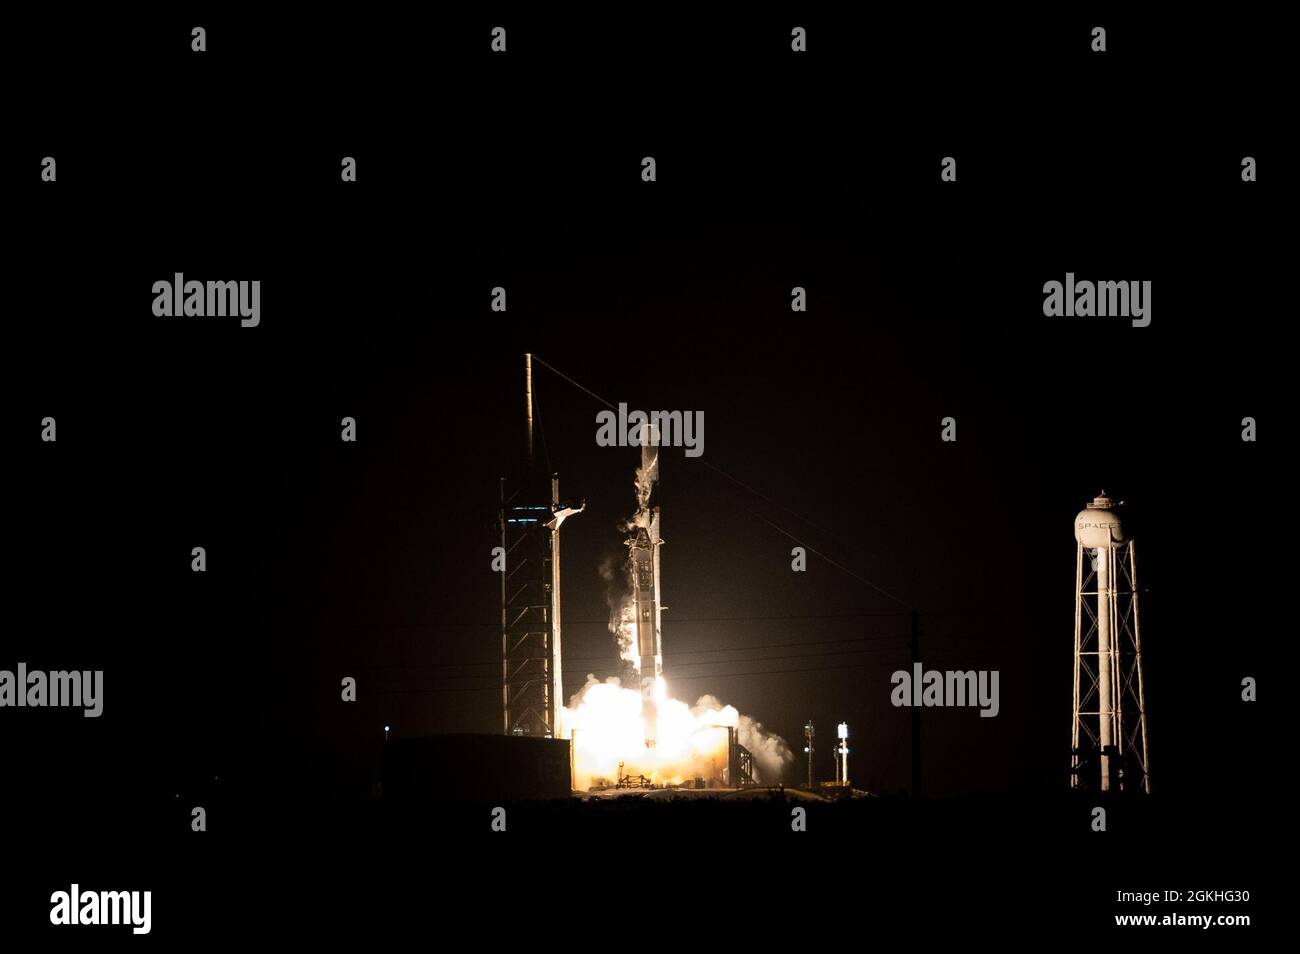 A SpaceX Falcon 9 rocket launches from Space Launch Complex 39A on April 23, 2021, at Kennedy Space Center, Florida. The rocket launched the four members of Dragon Crew-2 into space. The astronauts will spend six months on the International Space Station performing a variety of experiments and maintenance actions on the orbiting laboratory. Stock Photo